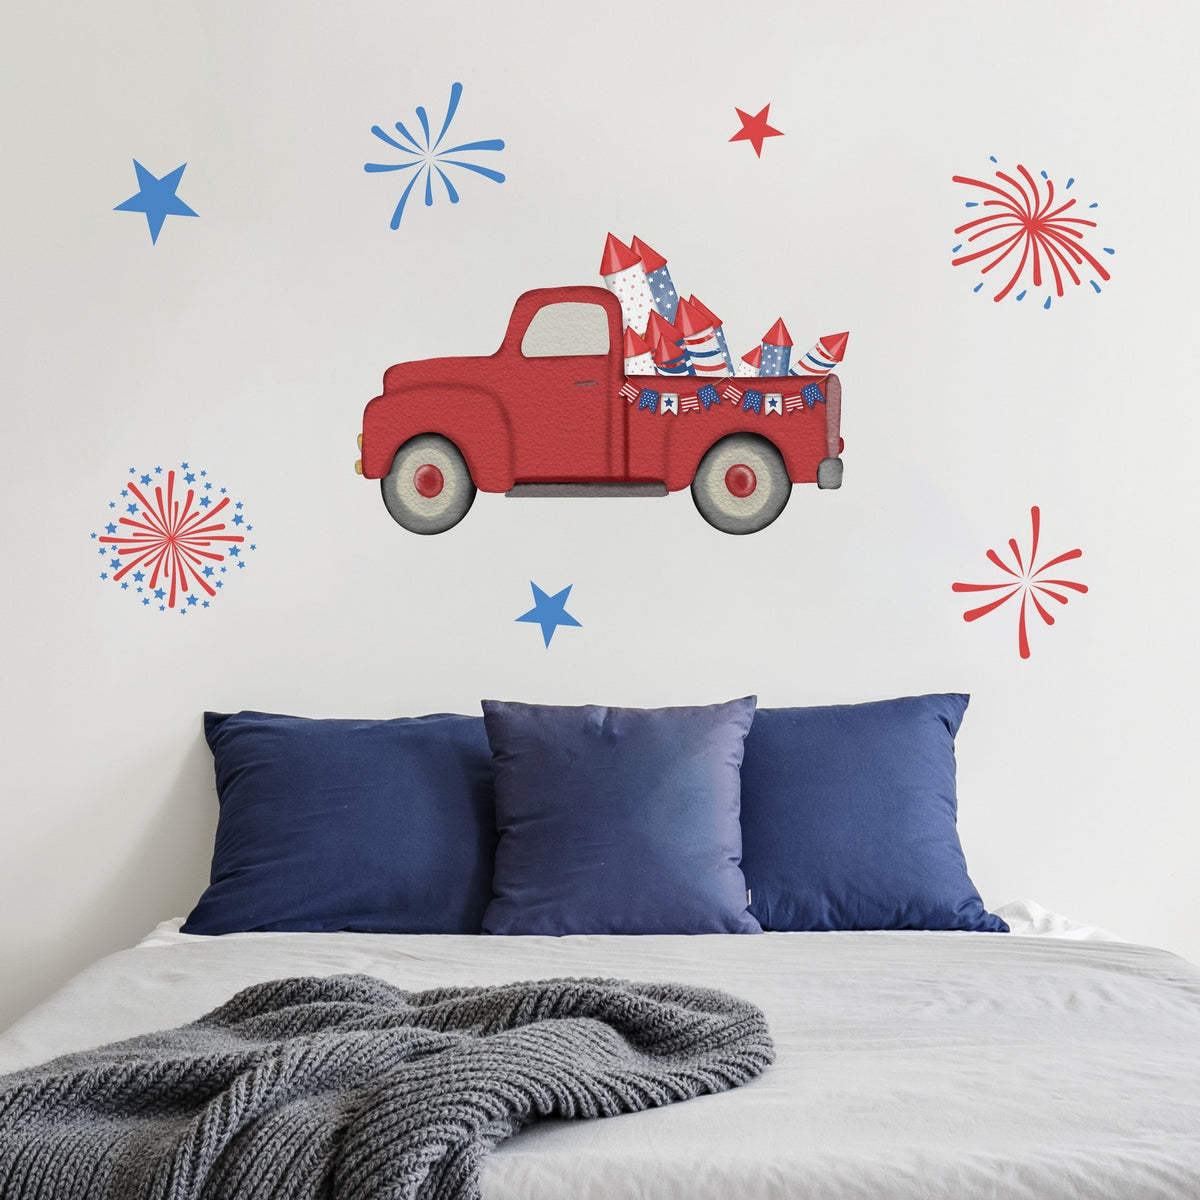 God Bless America Wall Decals